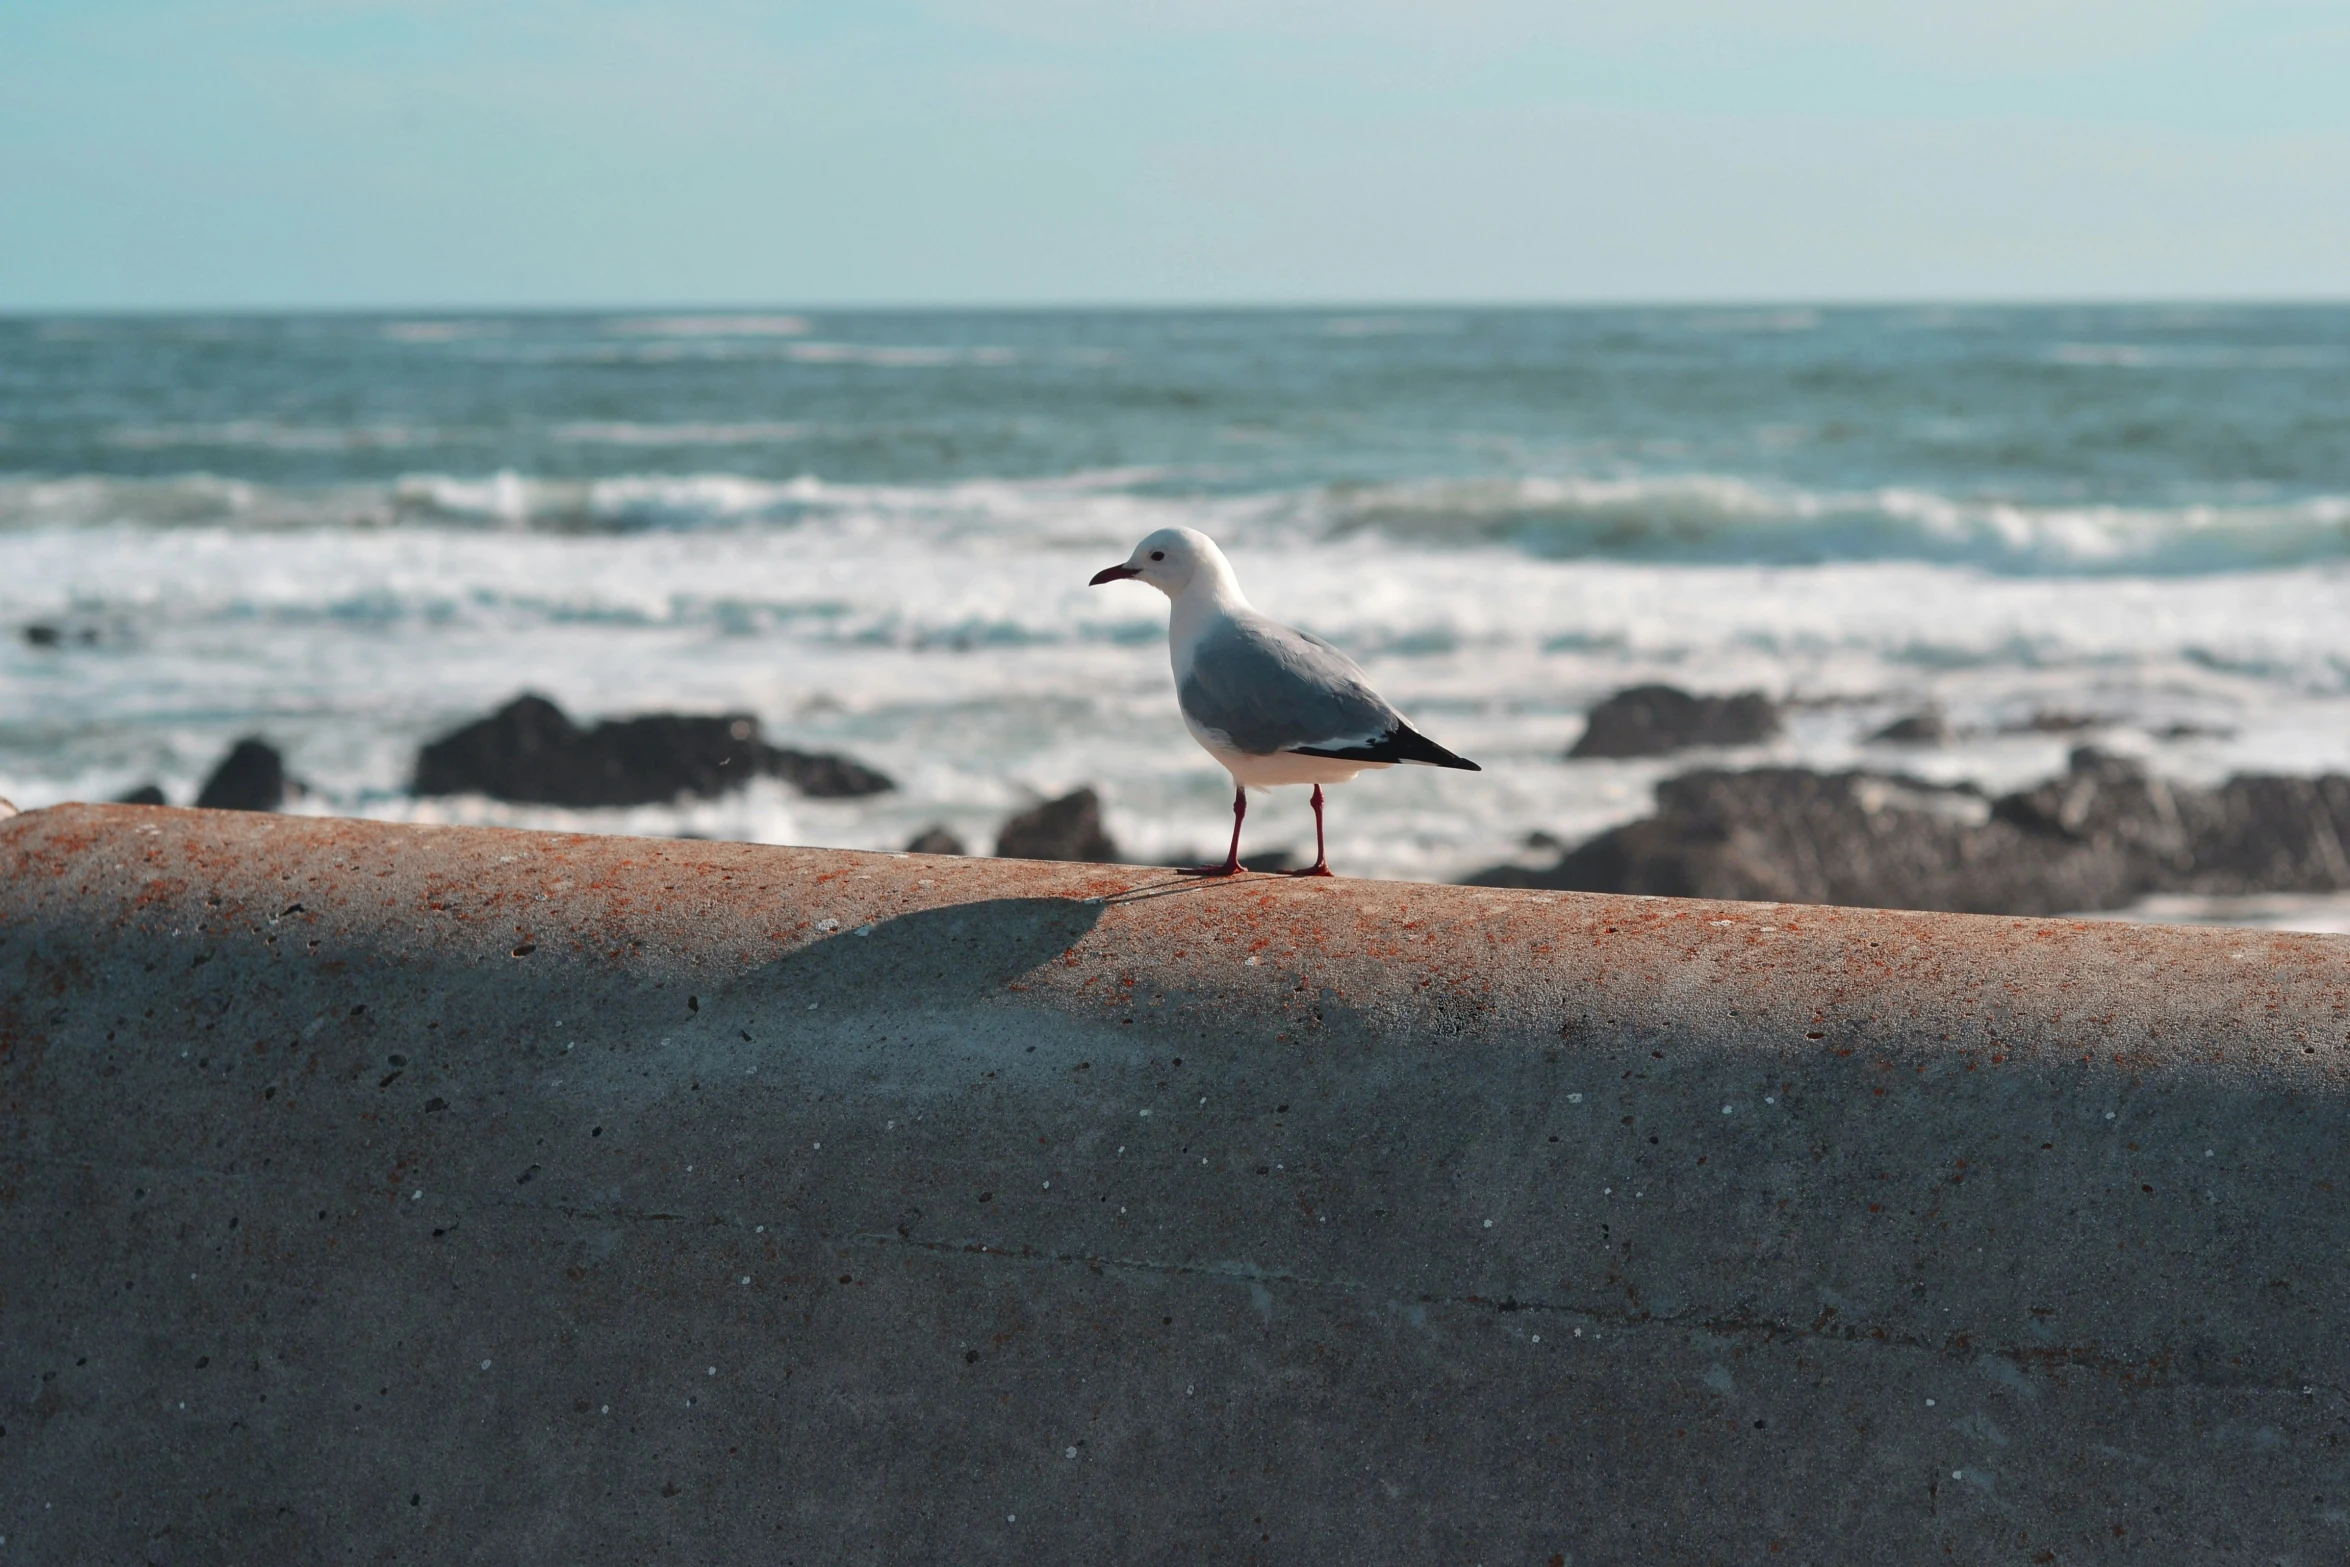 seagull standing on ledge overlooking ocean in front of water